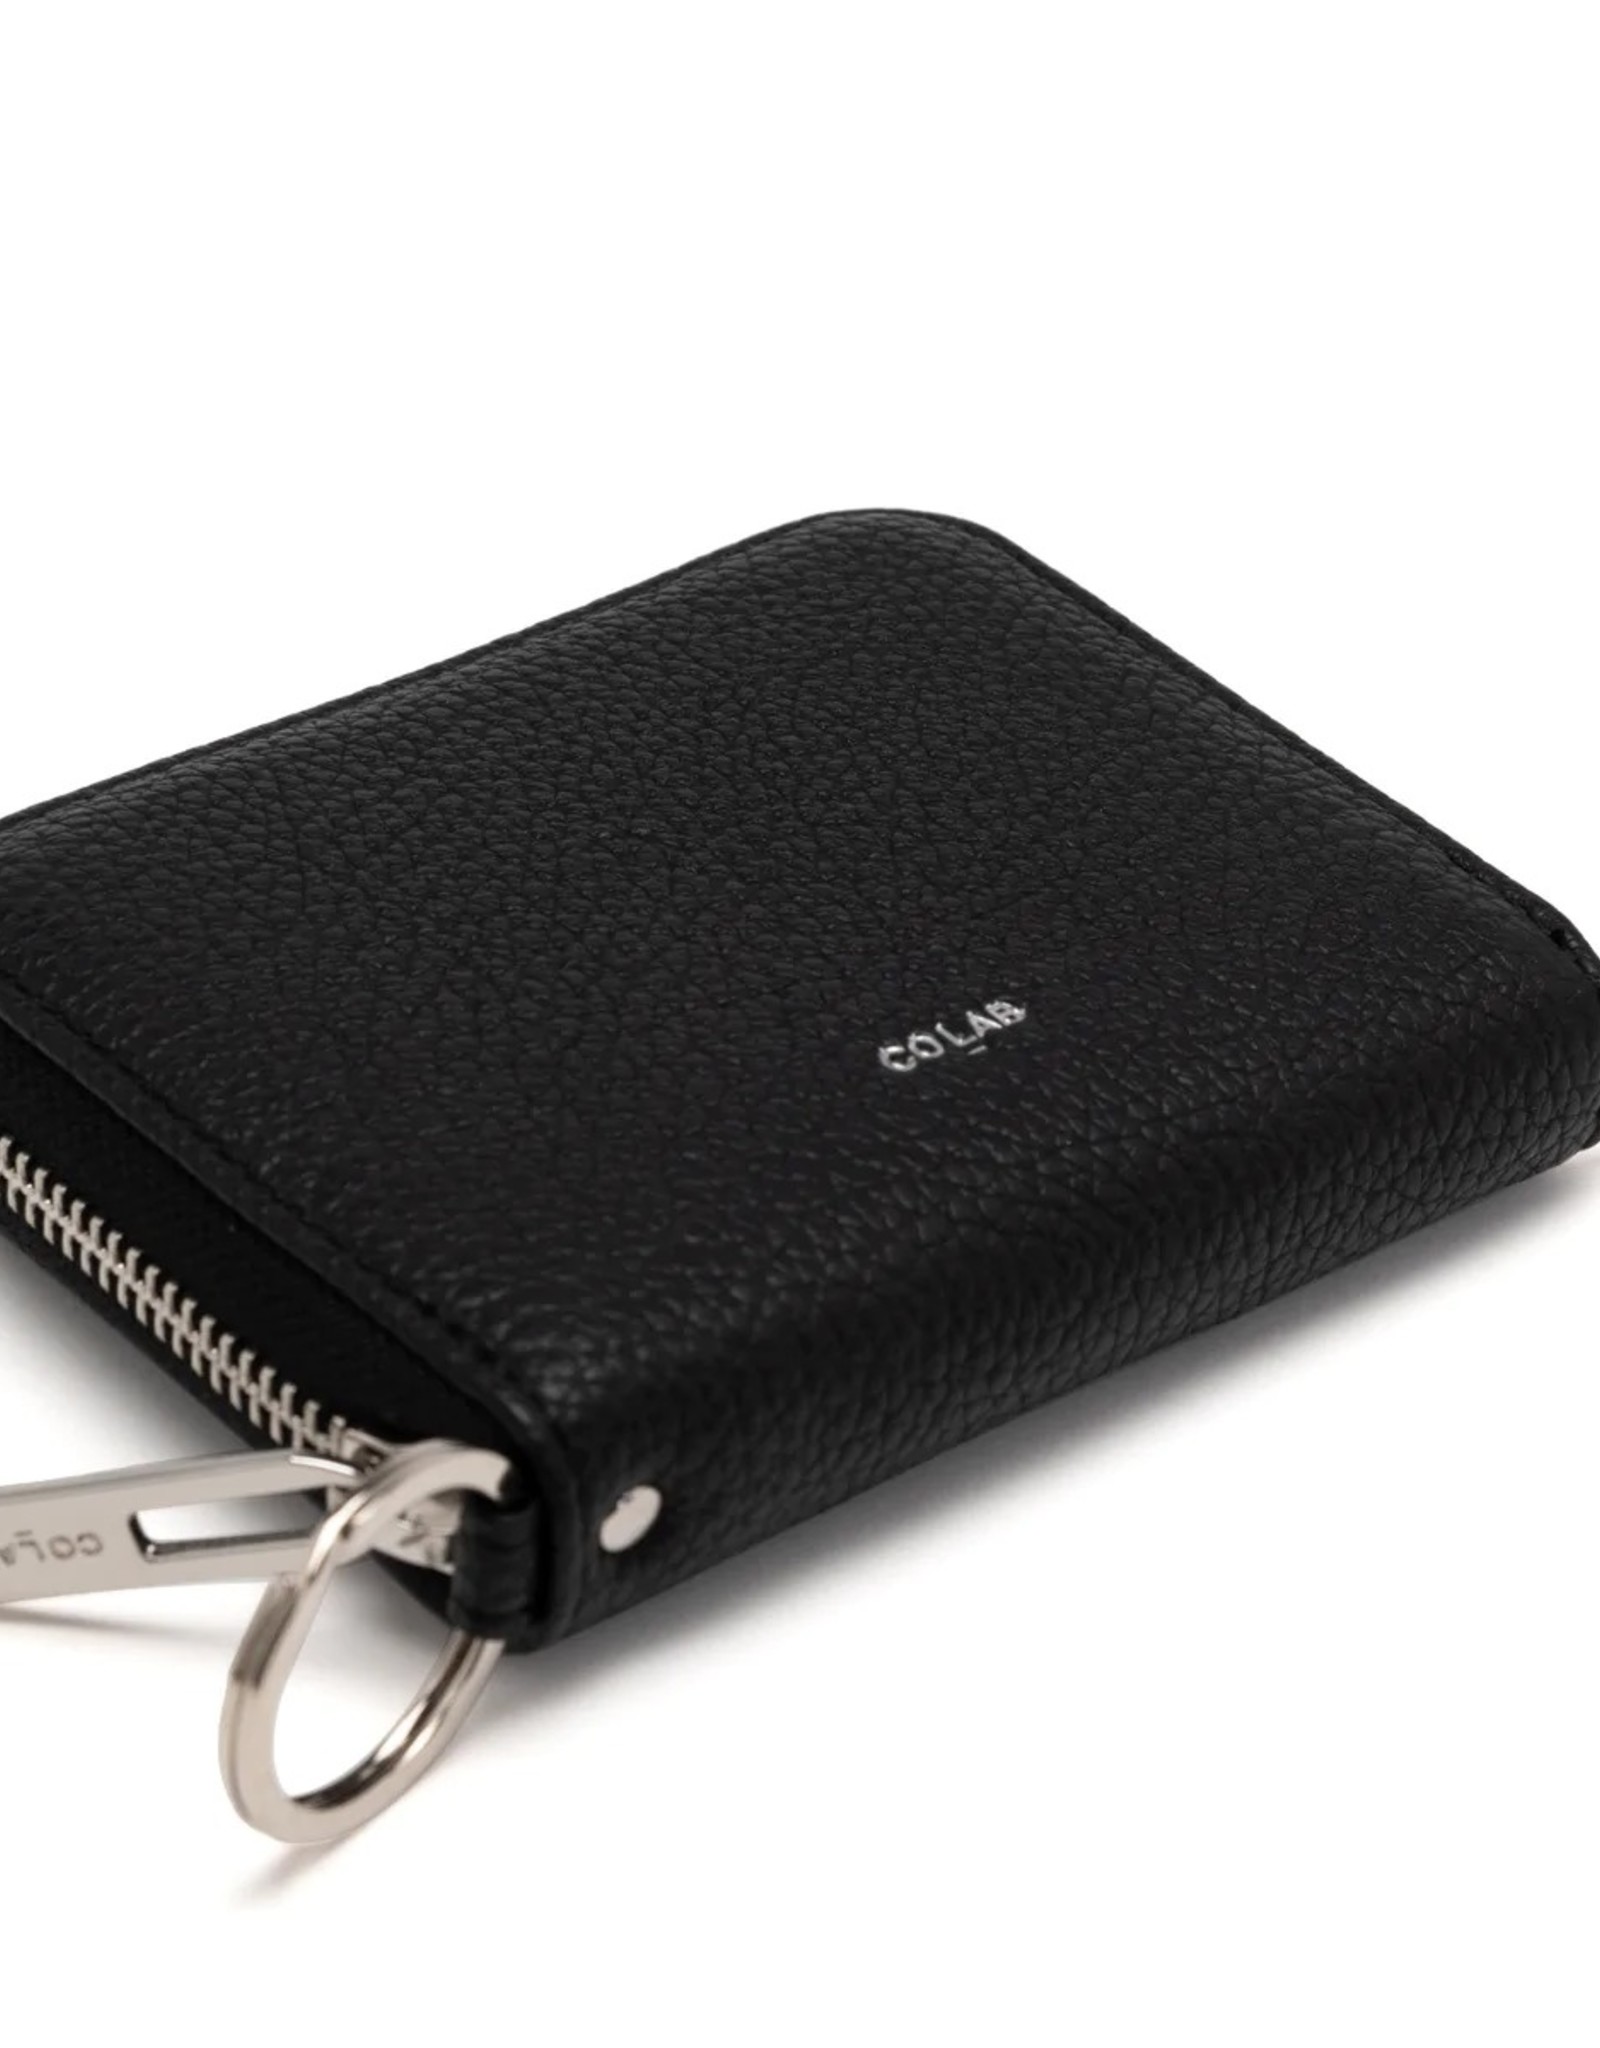 Co-Lab Co-Lab - 6888 Small Wallet